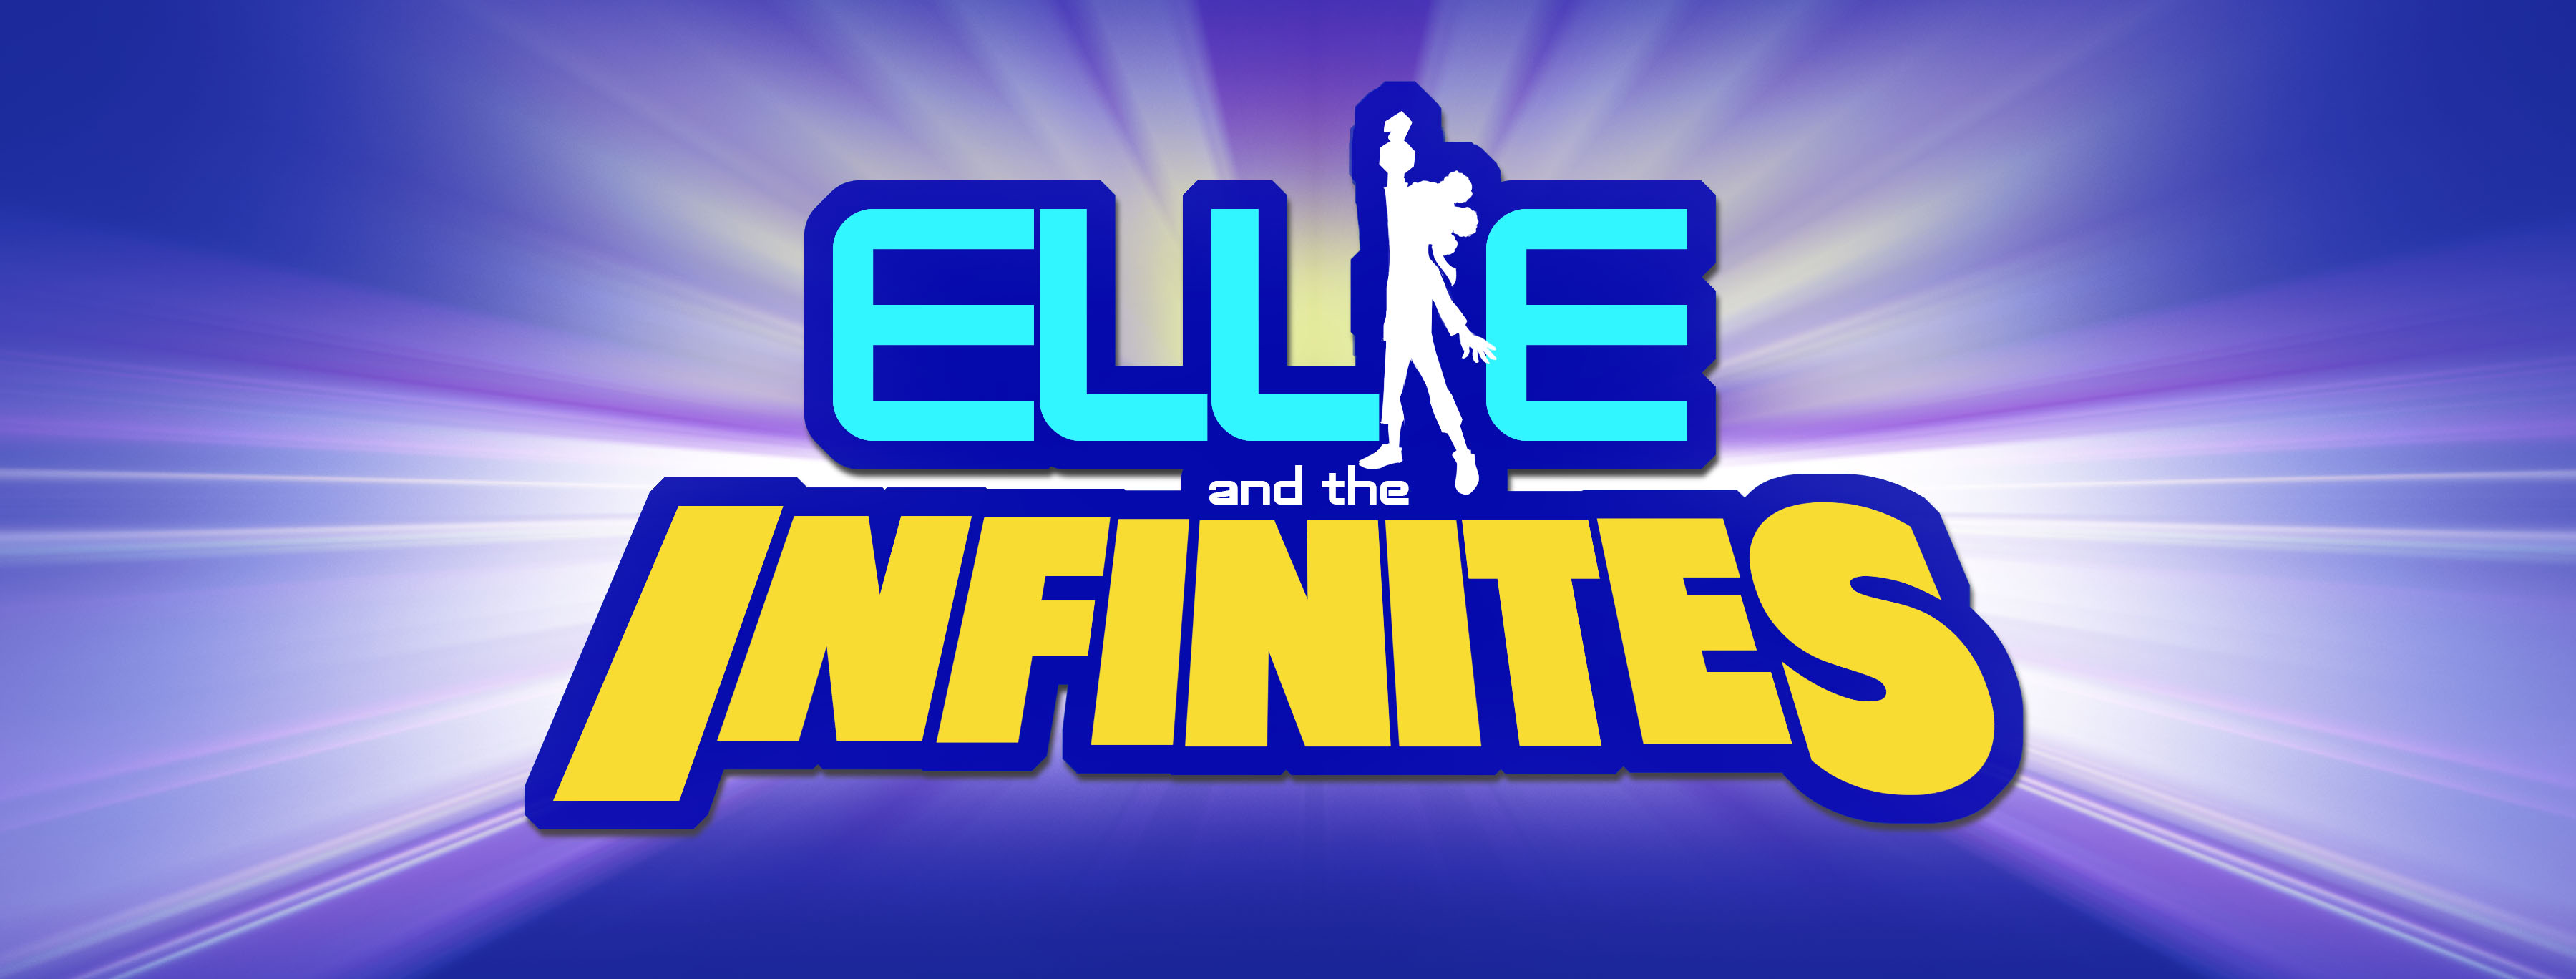 Ellie and the Infinites